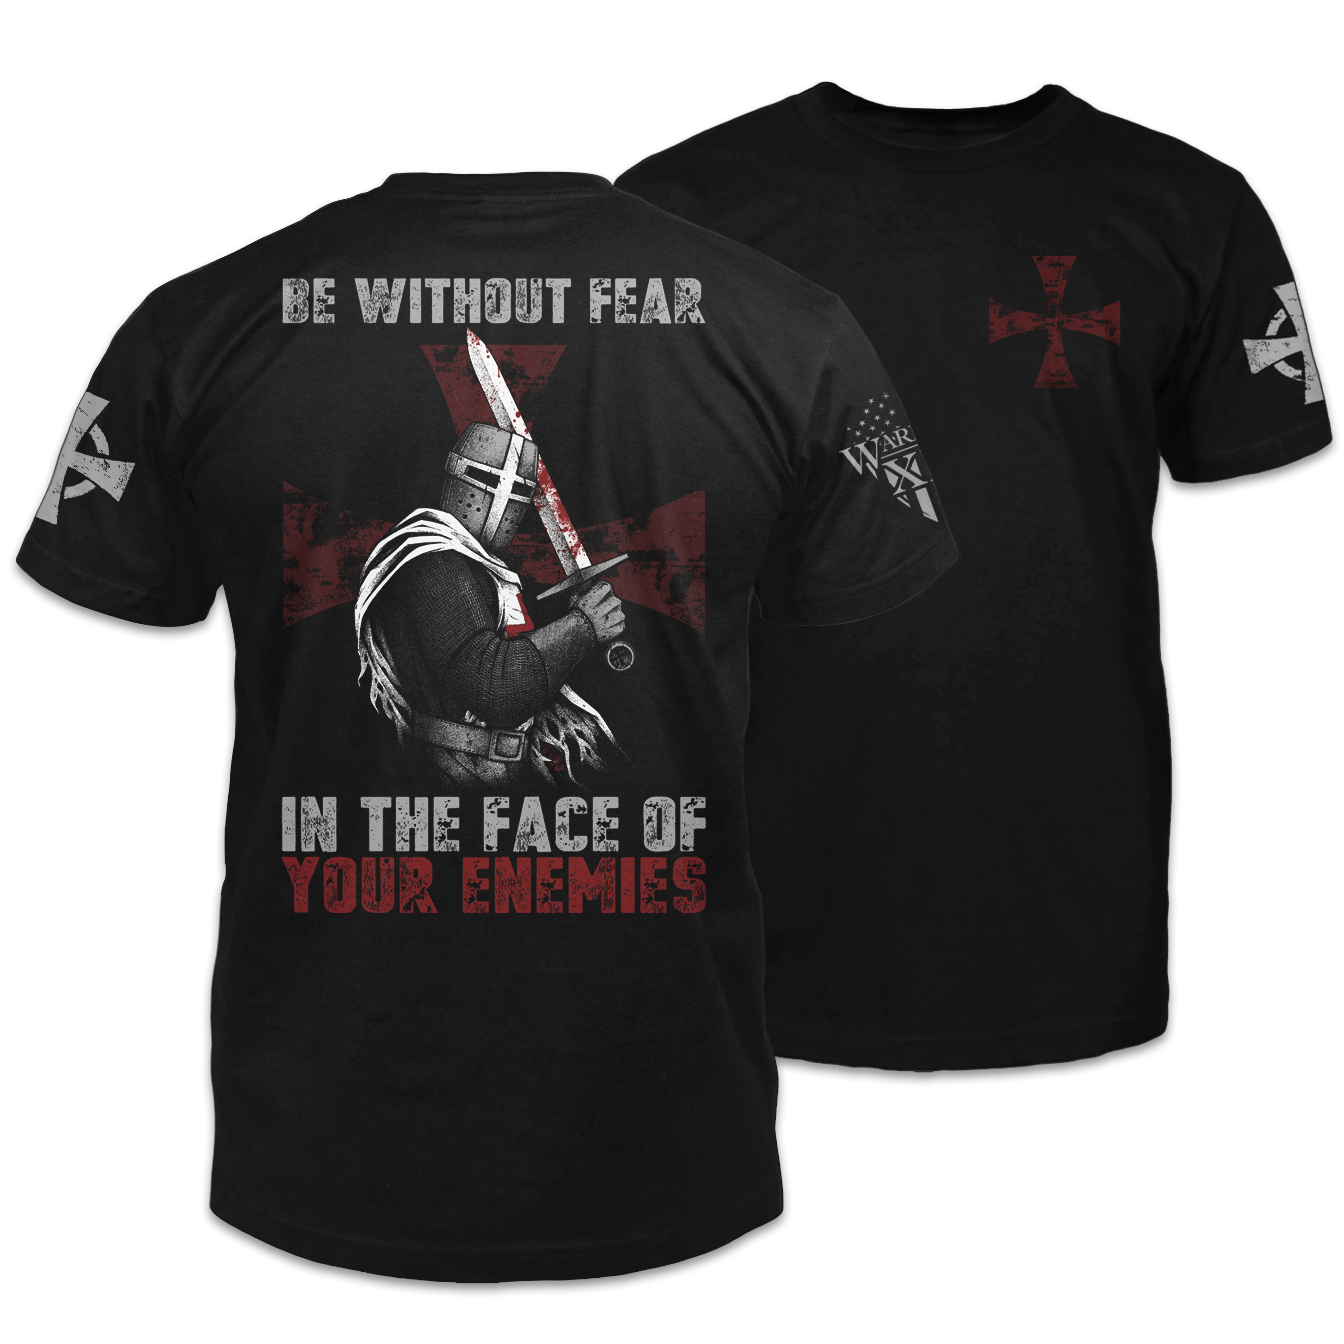 Front & back black t-shirt with the words "Be without feat In the face of your enemies" with a knights templar holding a sword printed on the shirt.